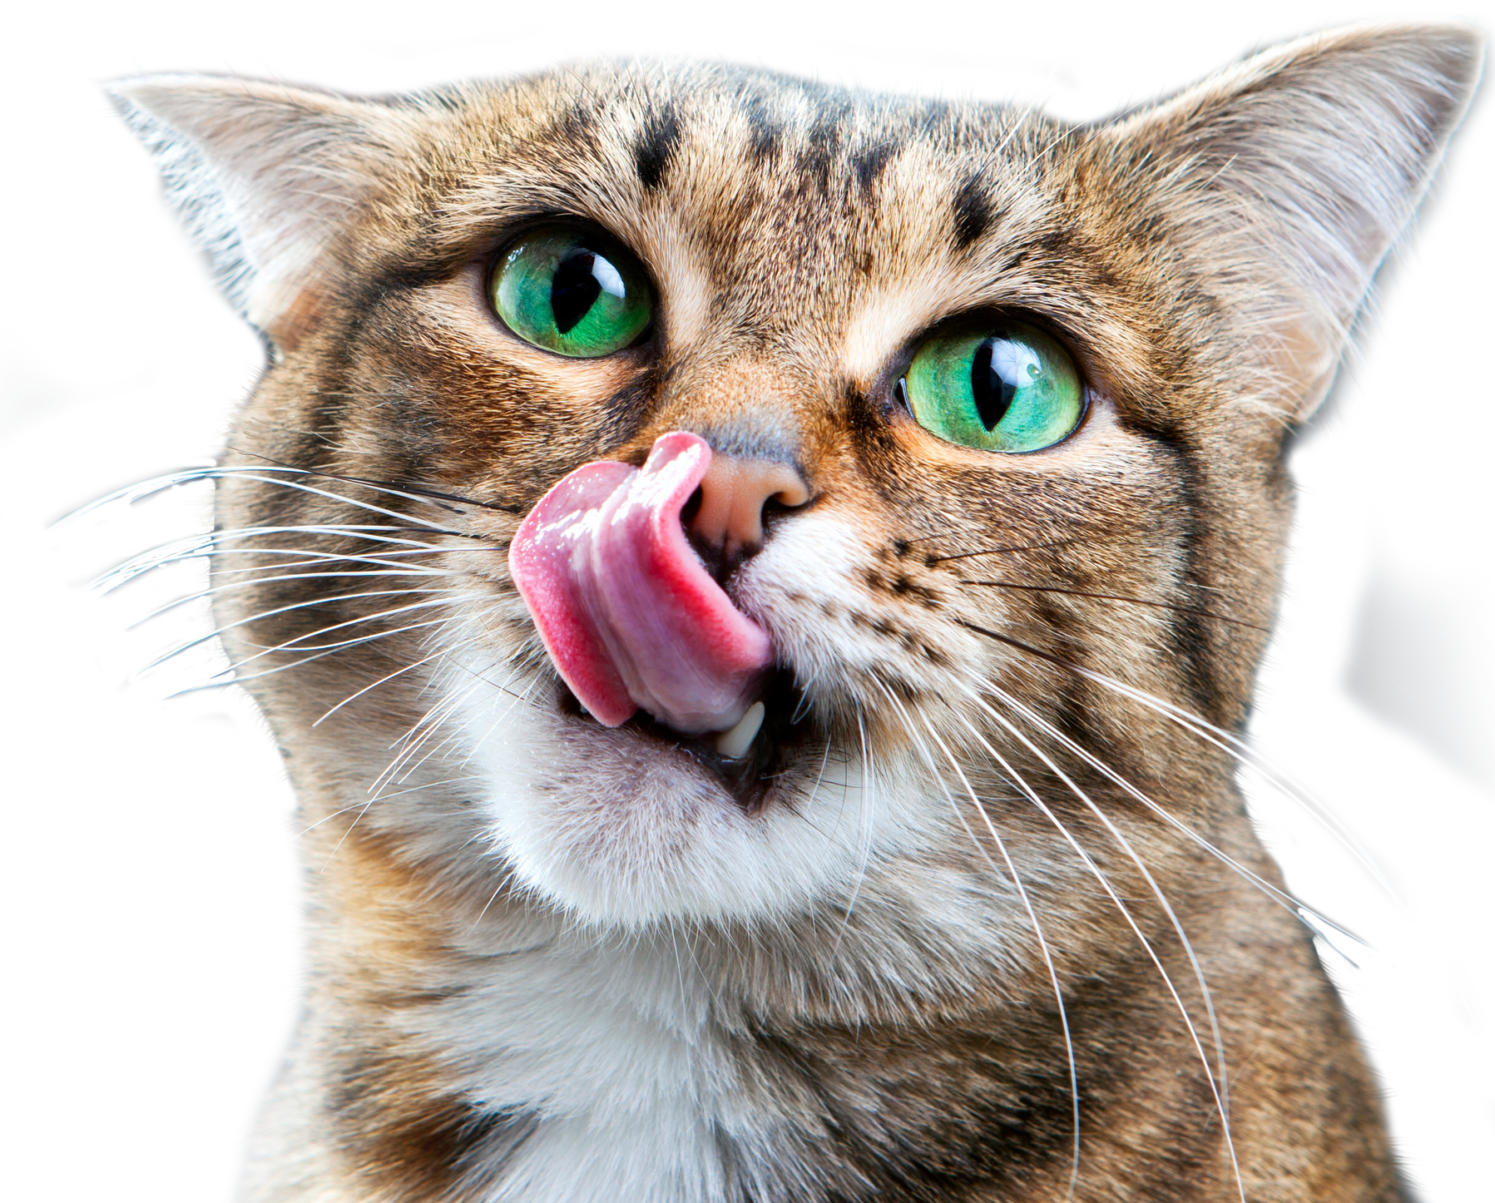 Cat with tongue out: Animal Hospital in Austin